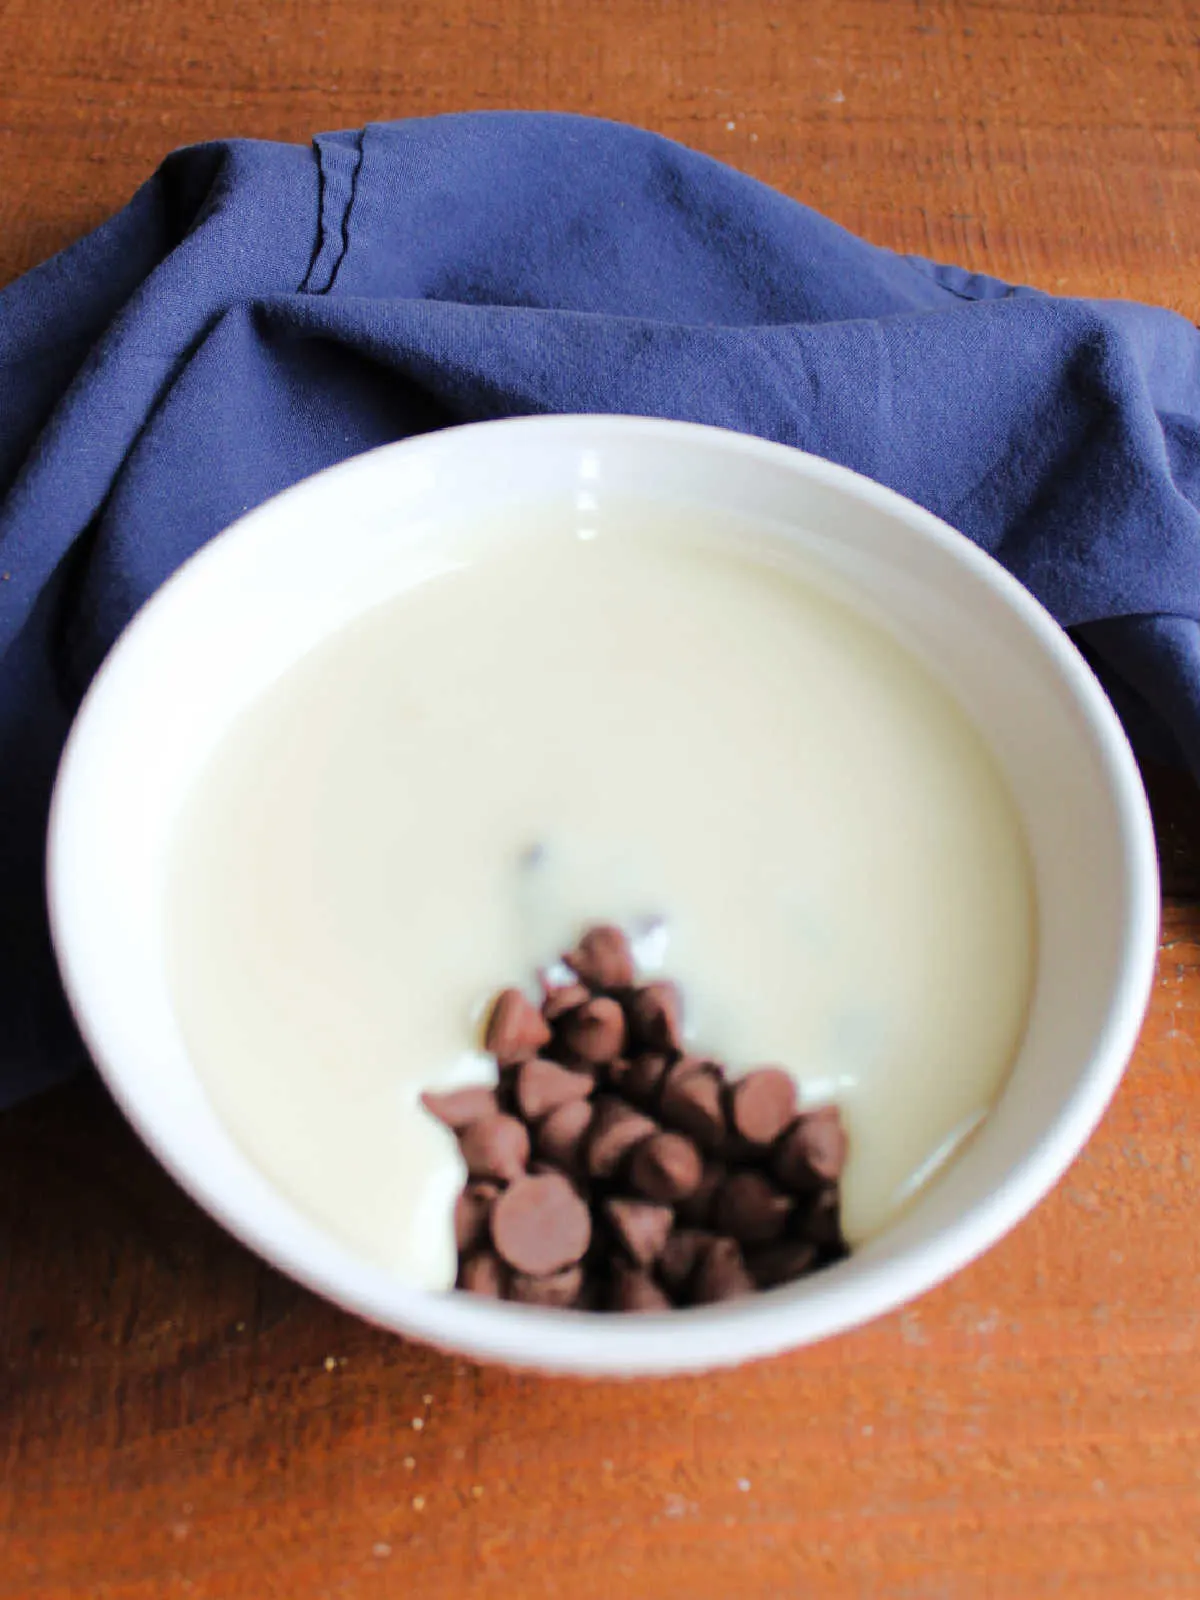 Sweetened condensed milk and chocolate chips in a bowl, ready to be melted into chocolate icing for the eclair cake.